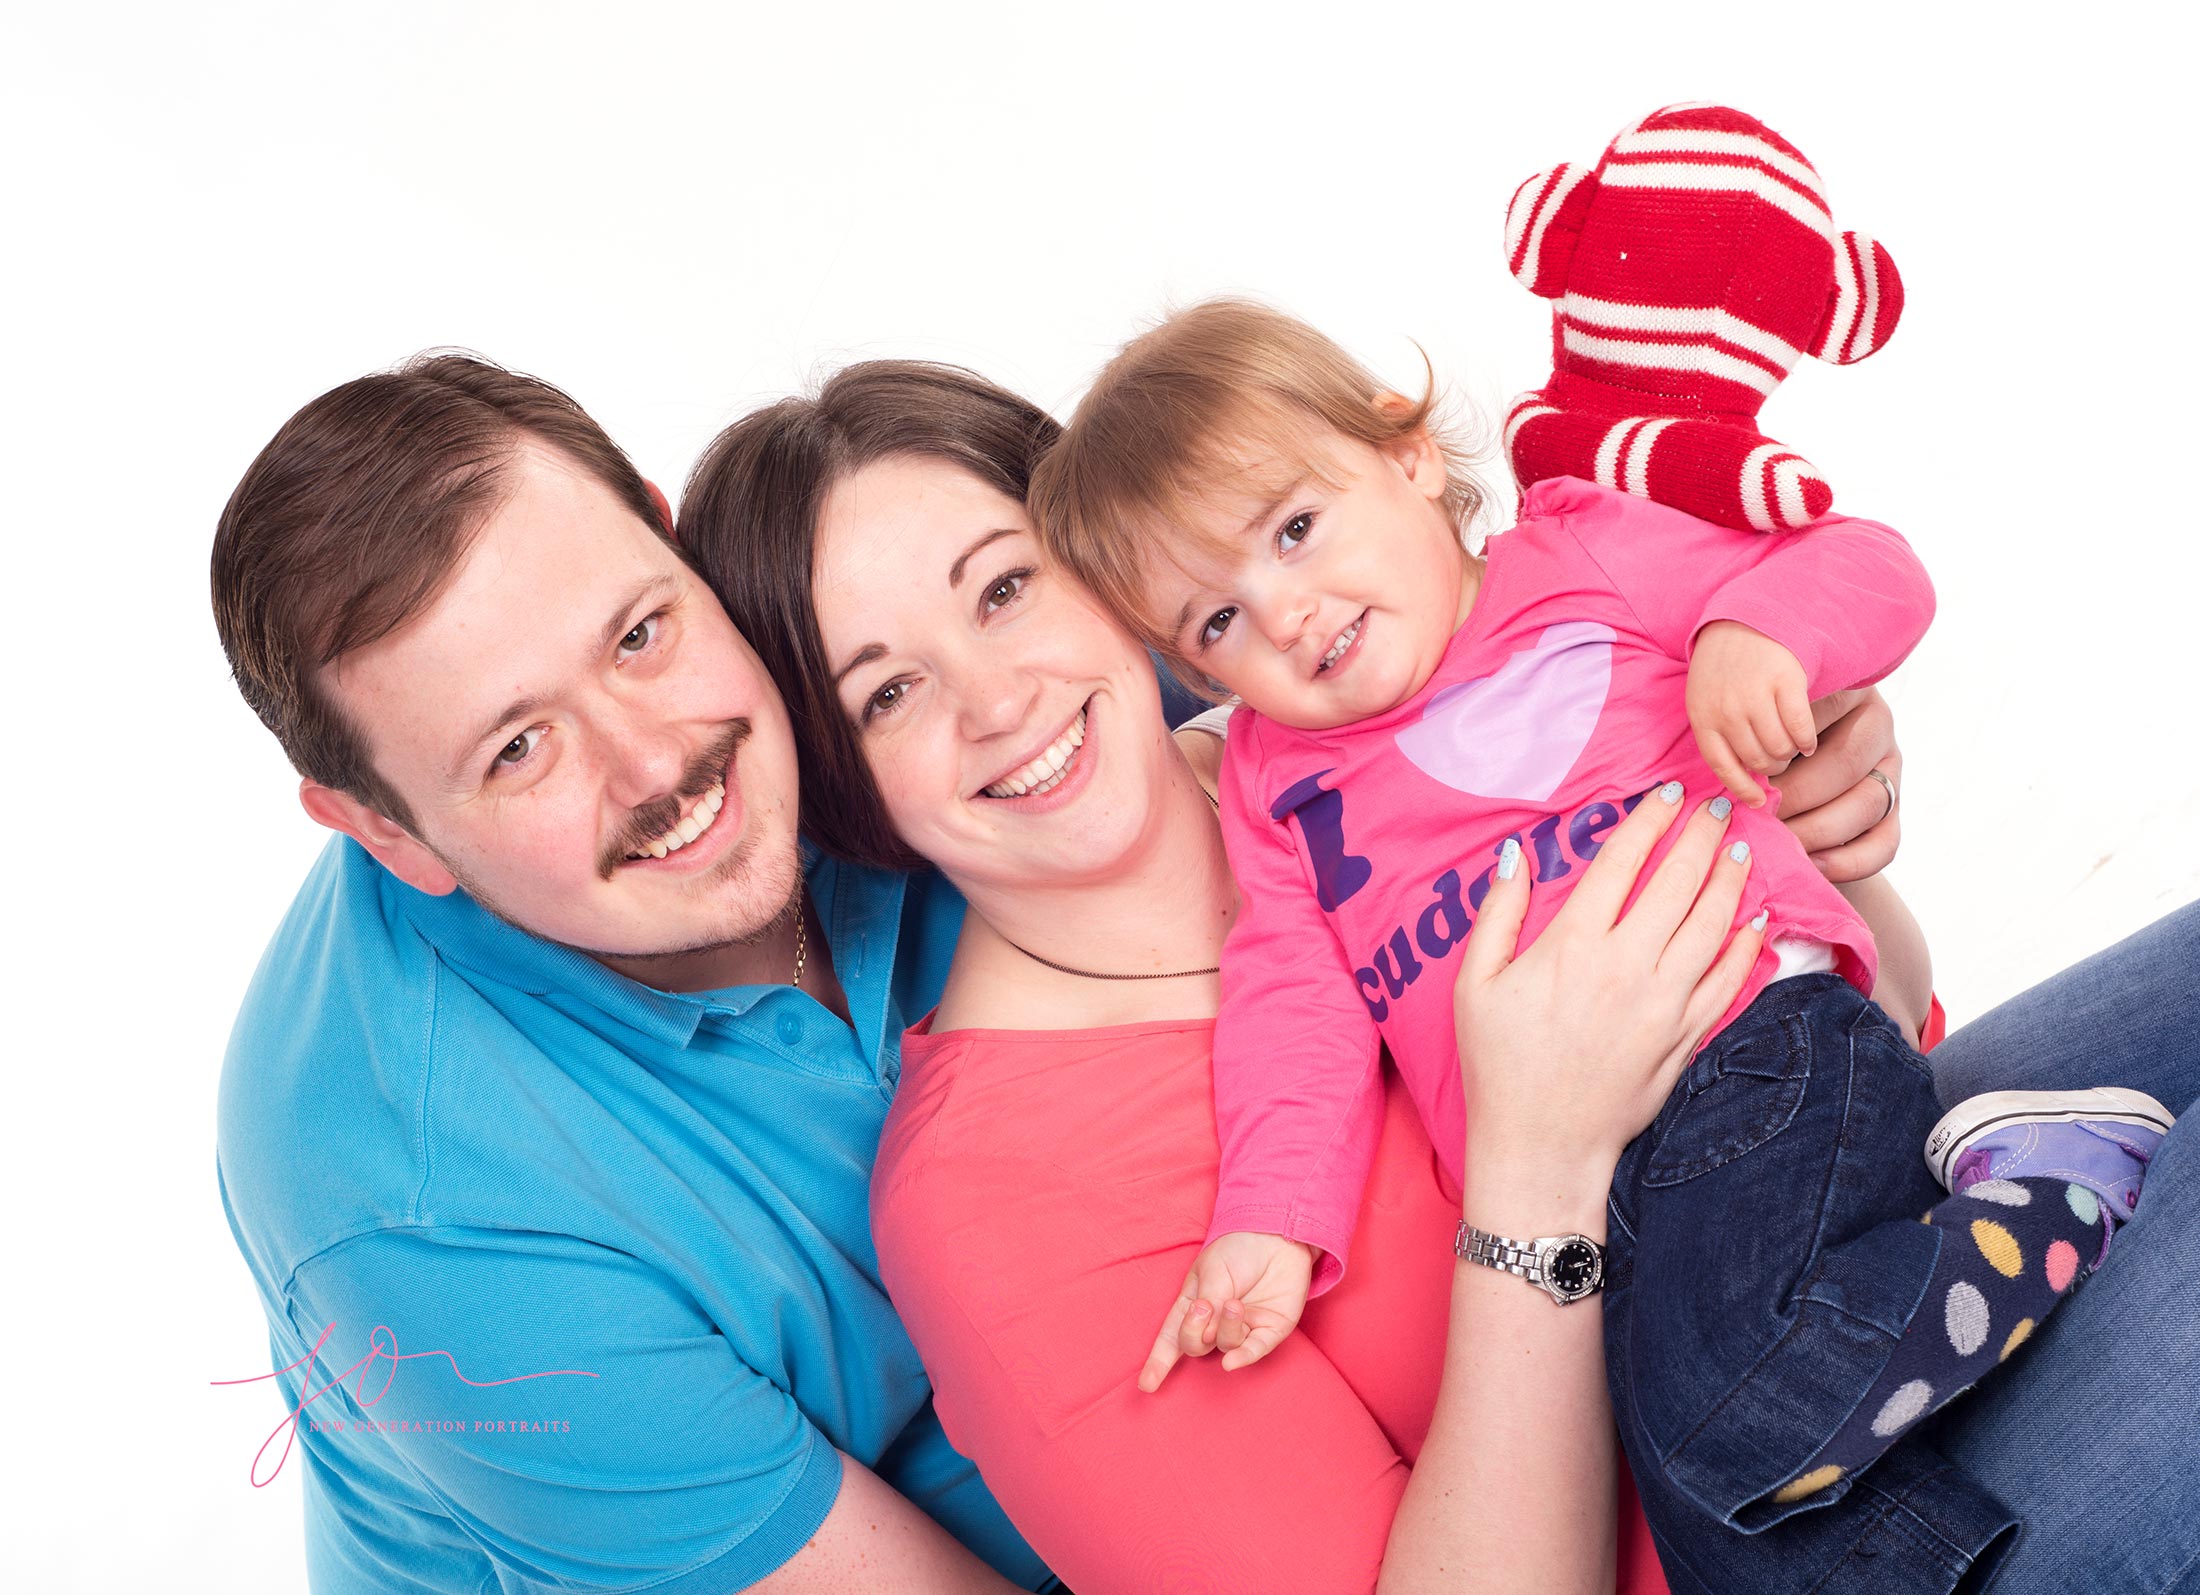 Happo portrait of mum, dad and daughter in our white studio. Captured by New Generation Portraits Ltd